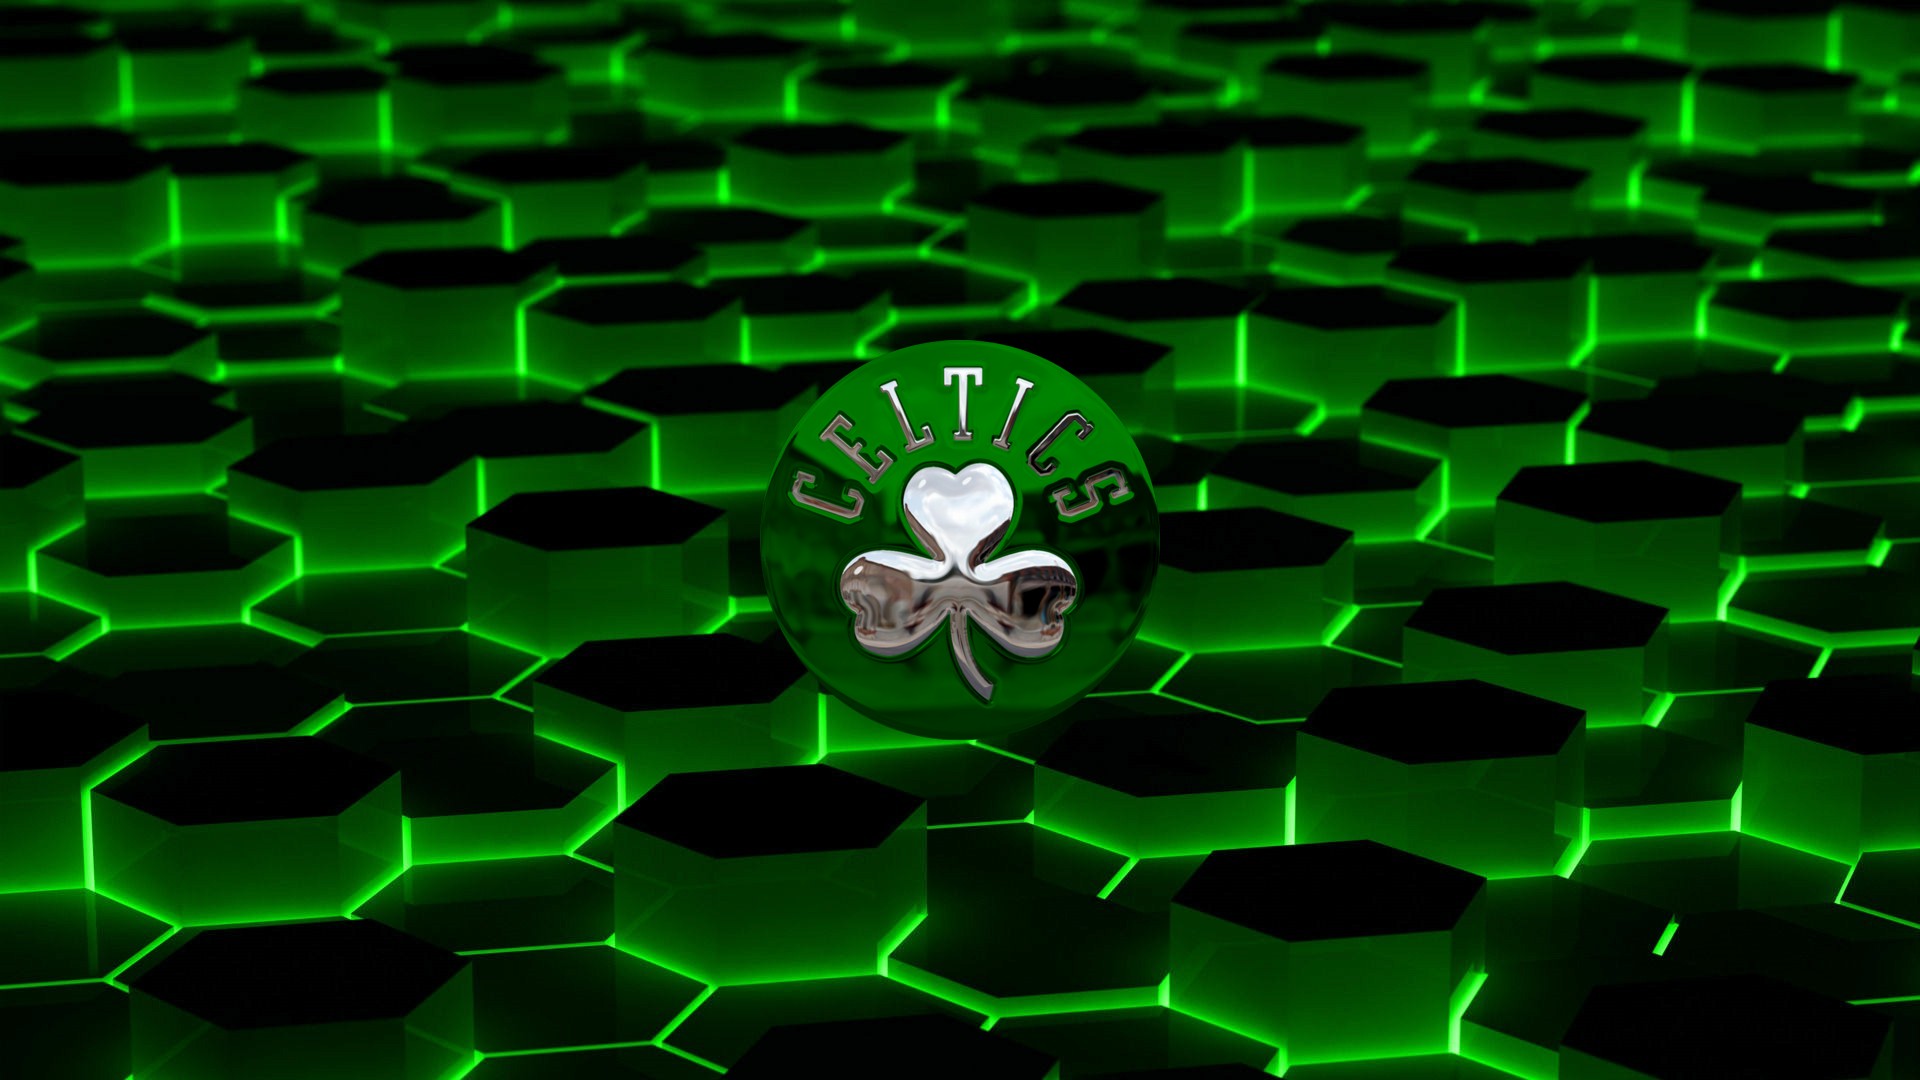 Celtics For PC Wallpaper with high-resolution 1920x1080 pixel. You can use this wallpaper for your Desktop Computer Backgrounds, Windows or Mac Screensavers, iPhone Lock screen, Tablet or Android and another Mobile Phone device